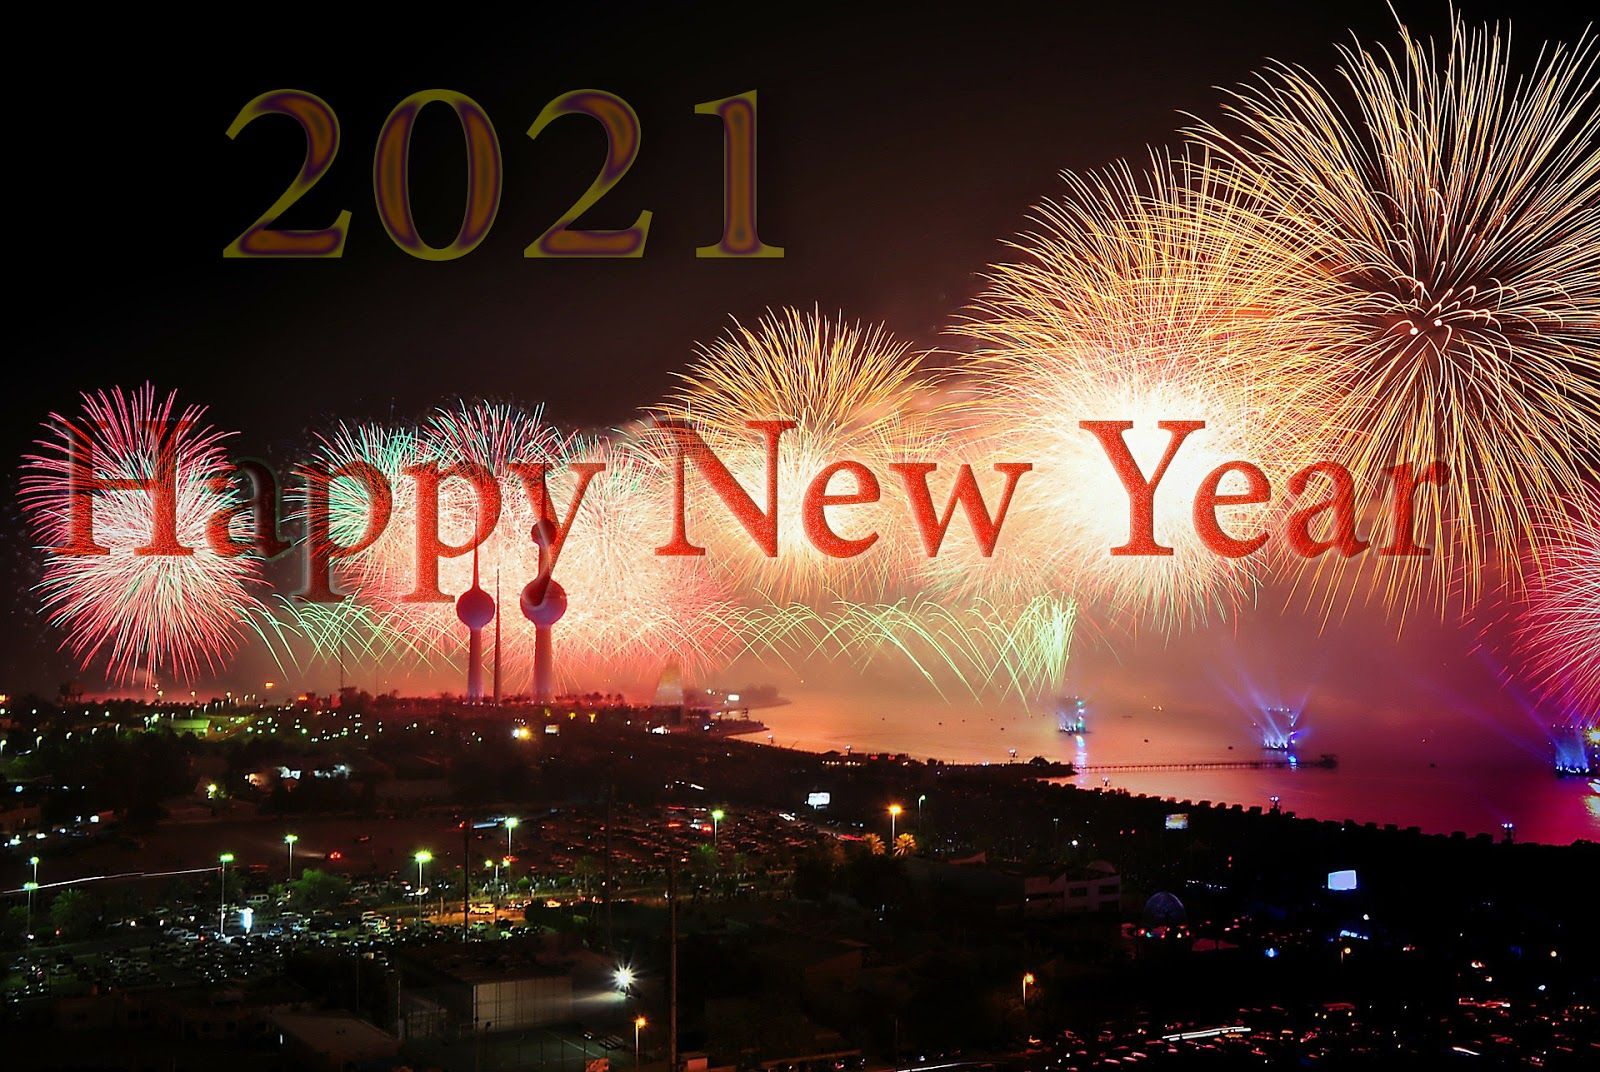 Happy New Year 2021 Wallpapers HD Image 2021 Happy New Year 2021 Wallpapers